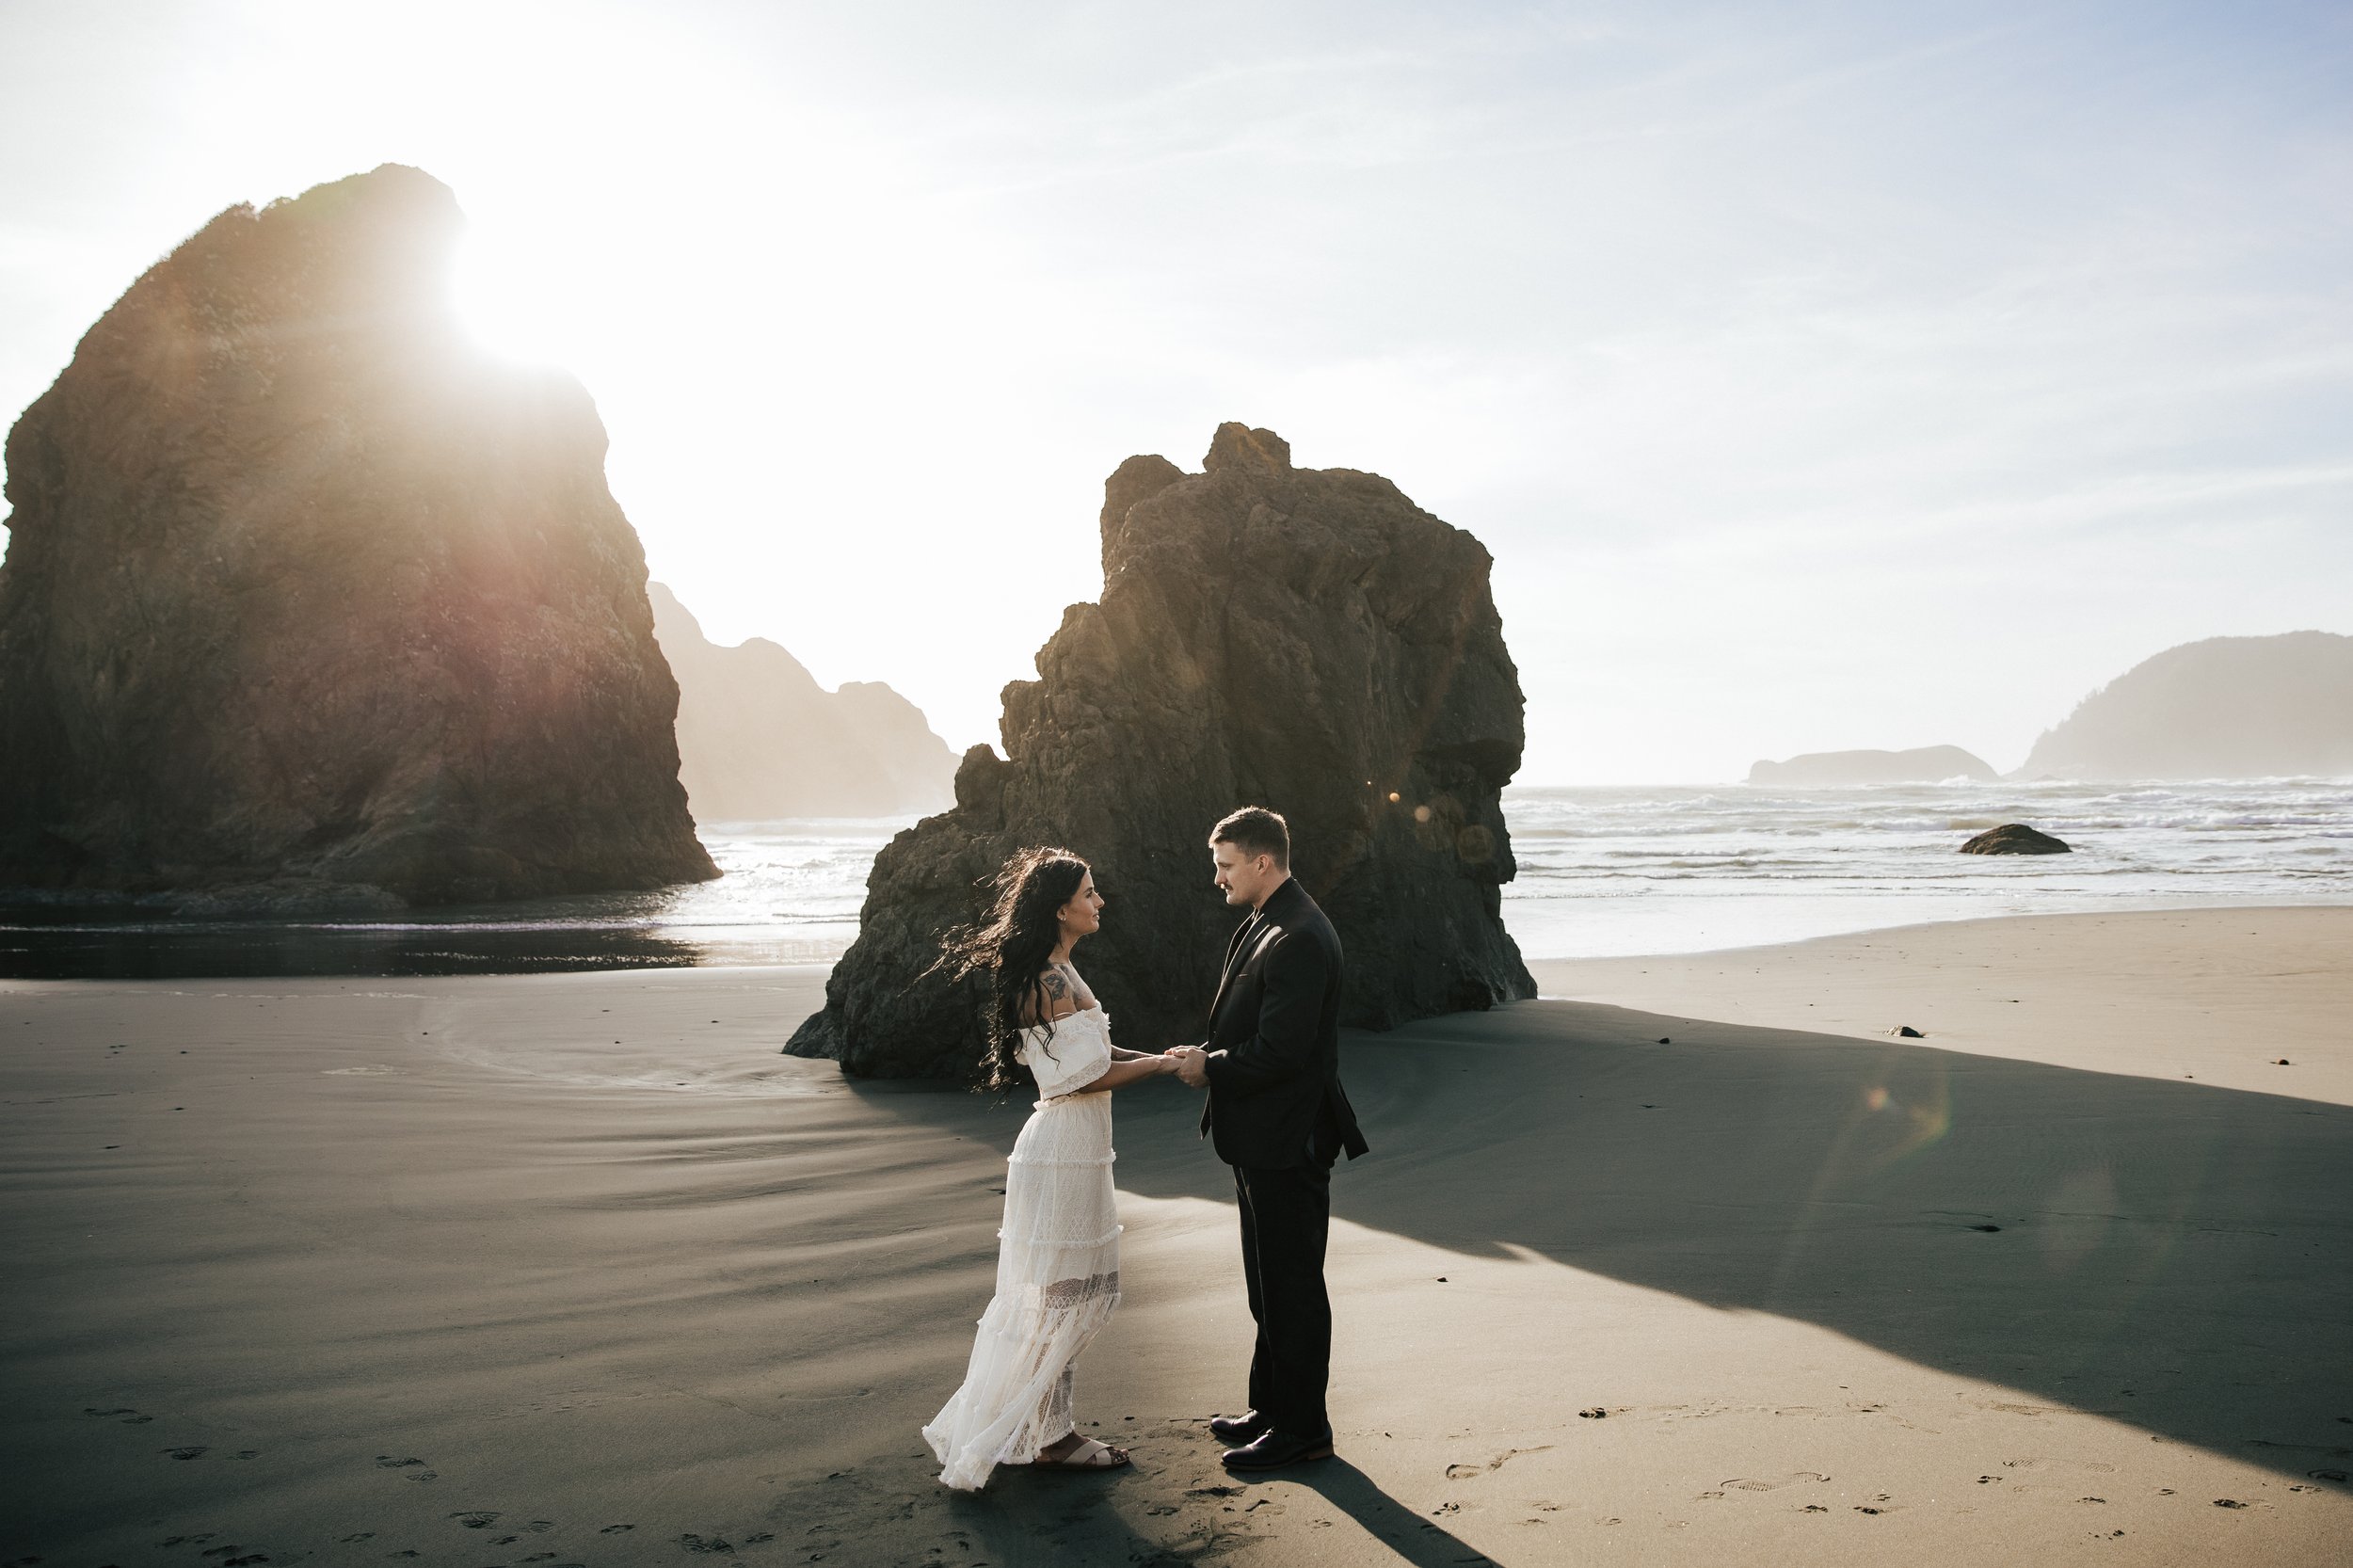  Oregon coast elopement. Couple elopes on the beach with the sun shining behind them. Sun rays behind rocks. Beach with rocks and haystacks. Southern Oregon. Brookings, Oregon. Samuel H Boardman elopement. #oregon #photographer #elopement 